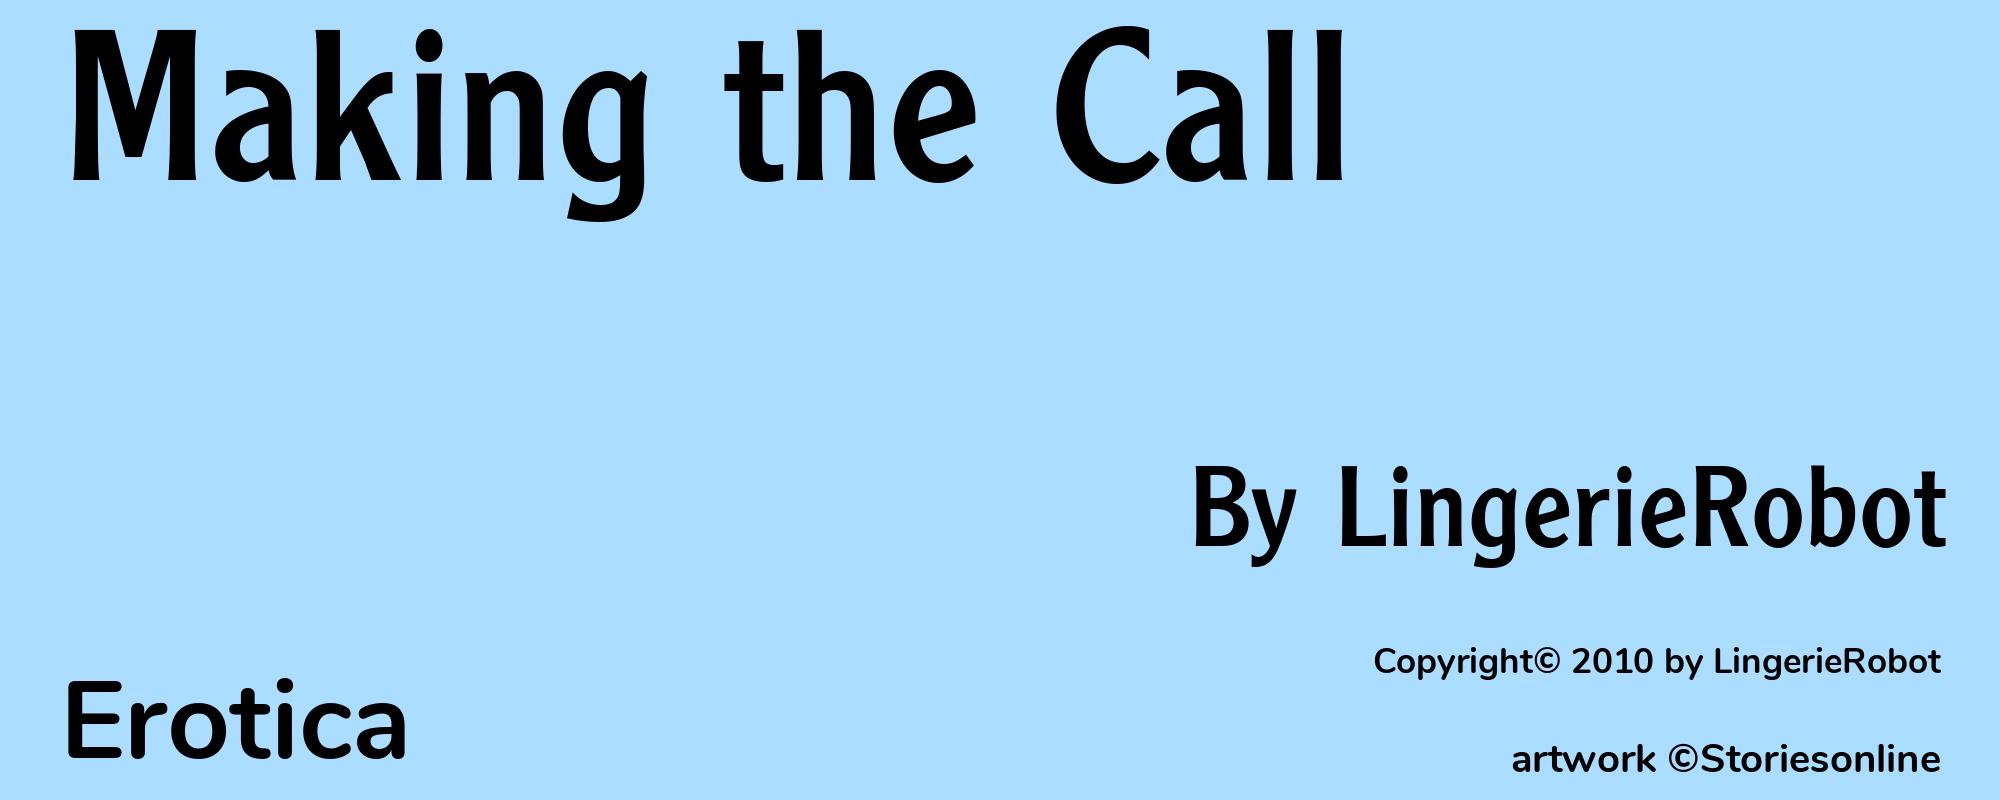 Making the Call - Cover